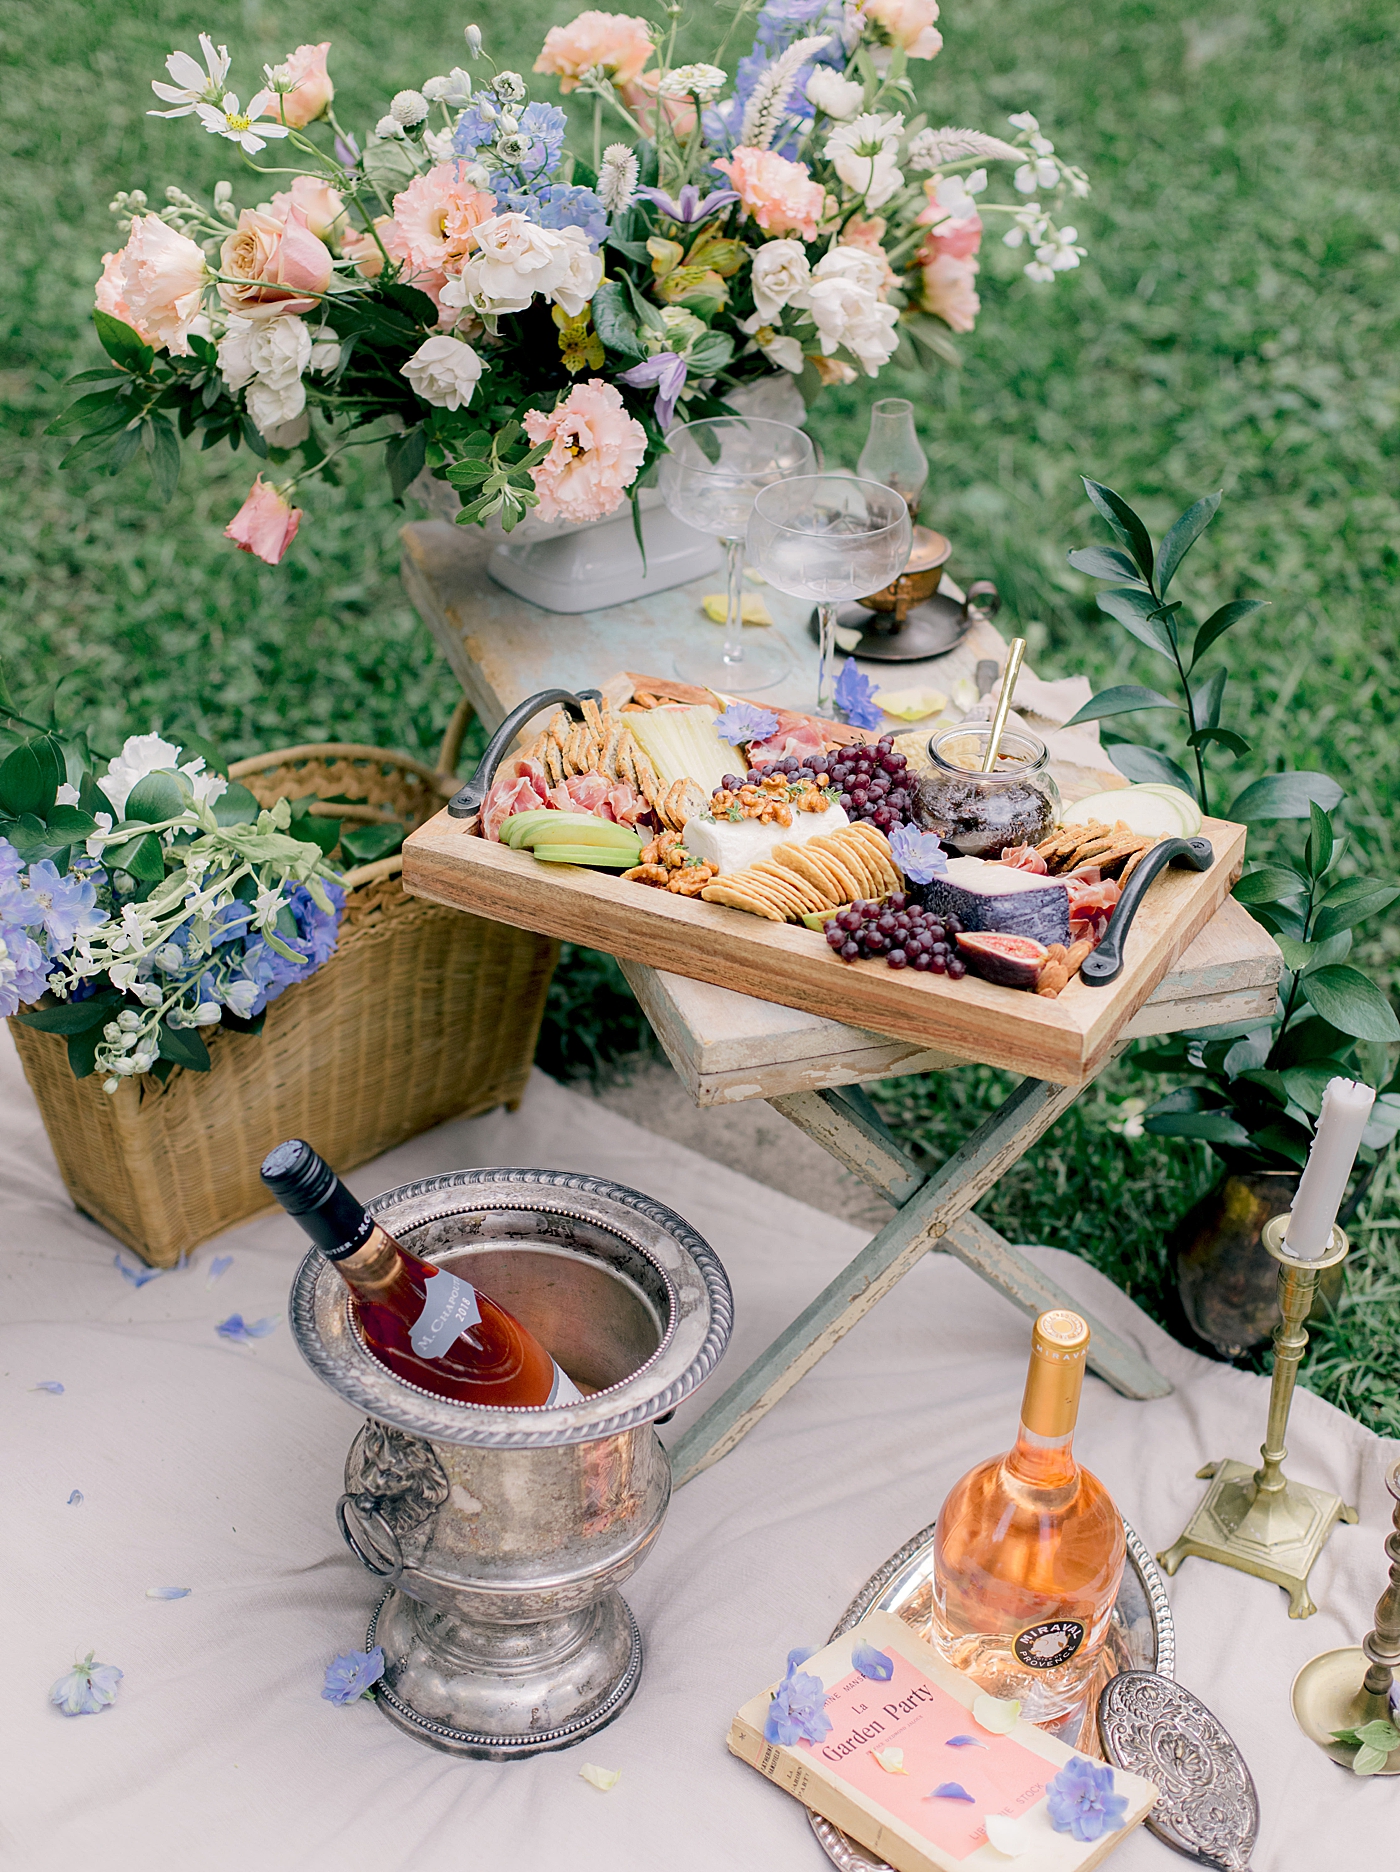 Charcuterie with rose and florals styled for a picnic | Image by Hope Helmuth Photography